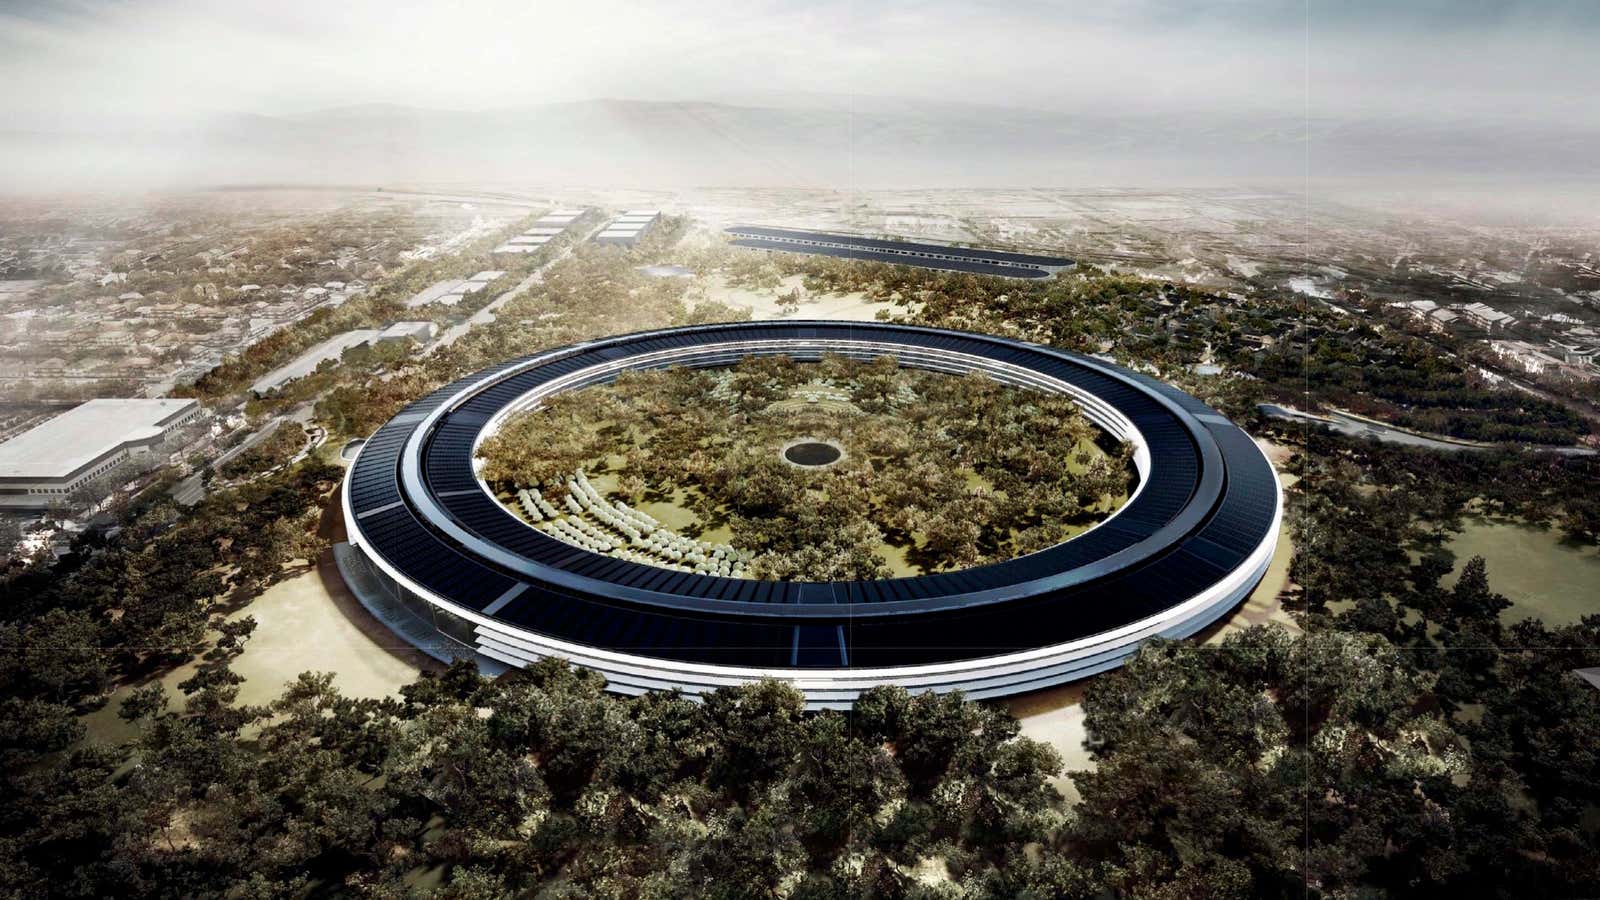 Soon to be the new Apple HQ.